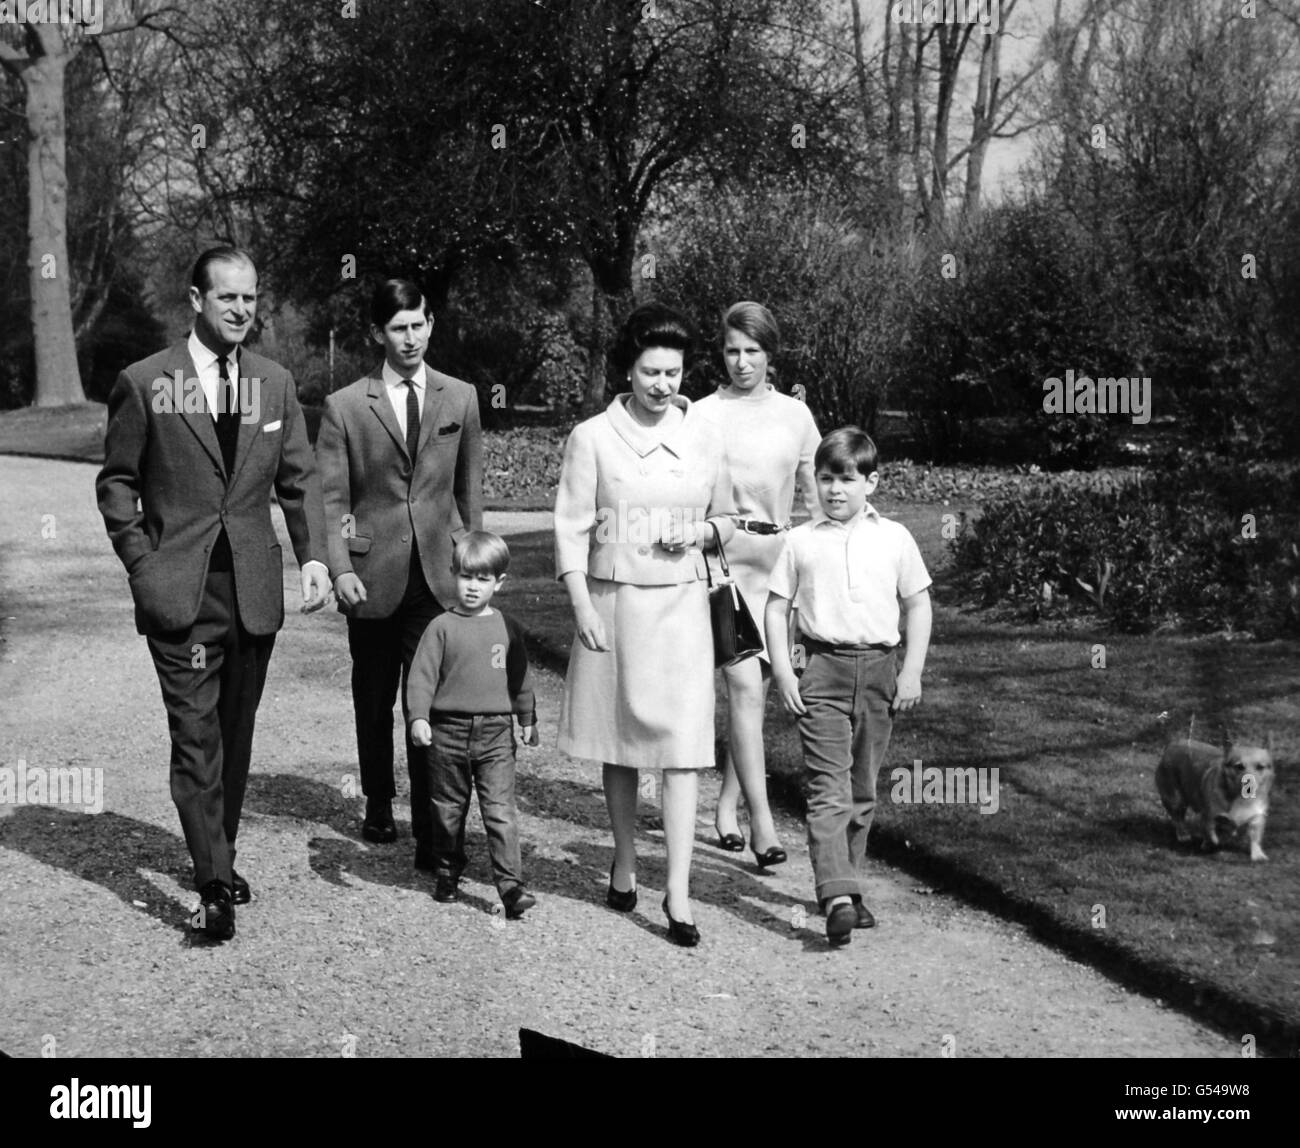 The Royal Family in the grounds of Frogmore House, Windsor. From left: The Duke of Edinburgh, Prince Charles, Prince Edward, Queen Elizabeth II, Princess Anne, and Prince Andrew. Stock Photo